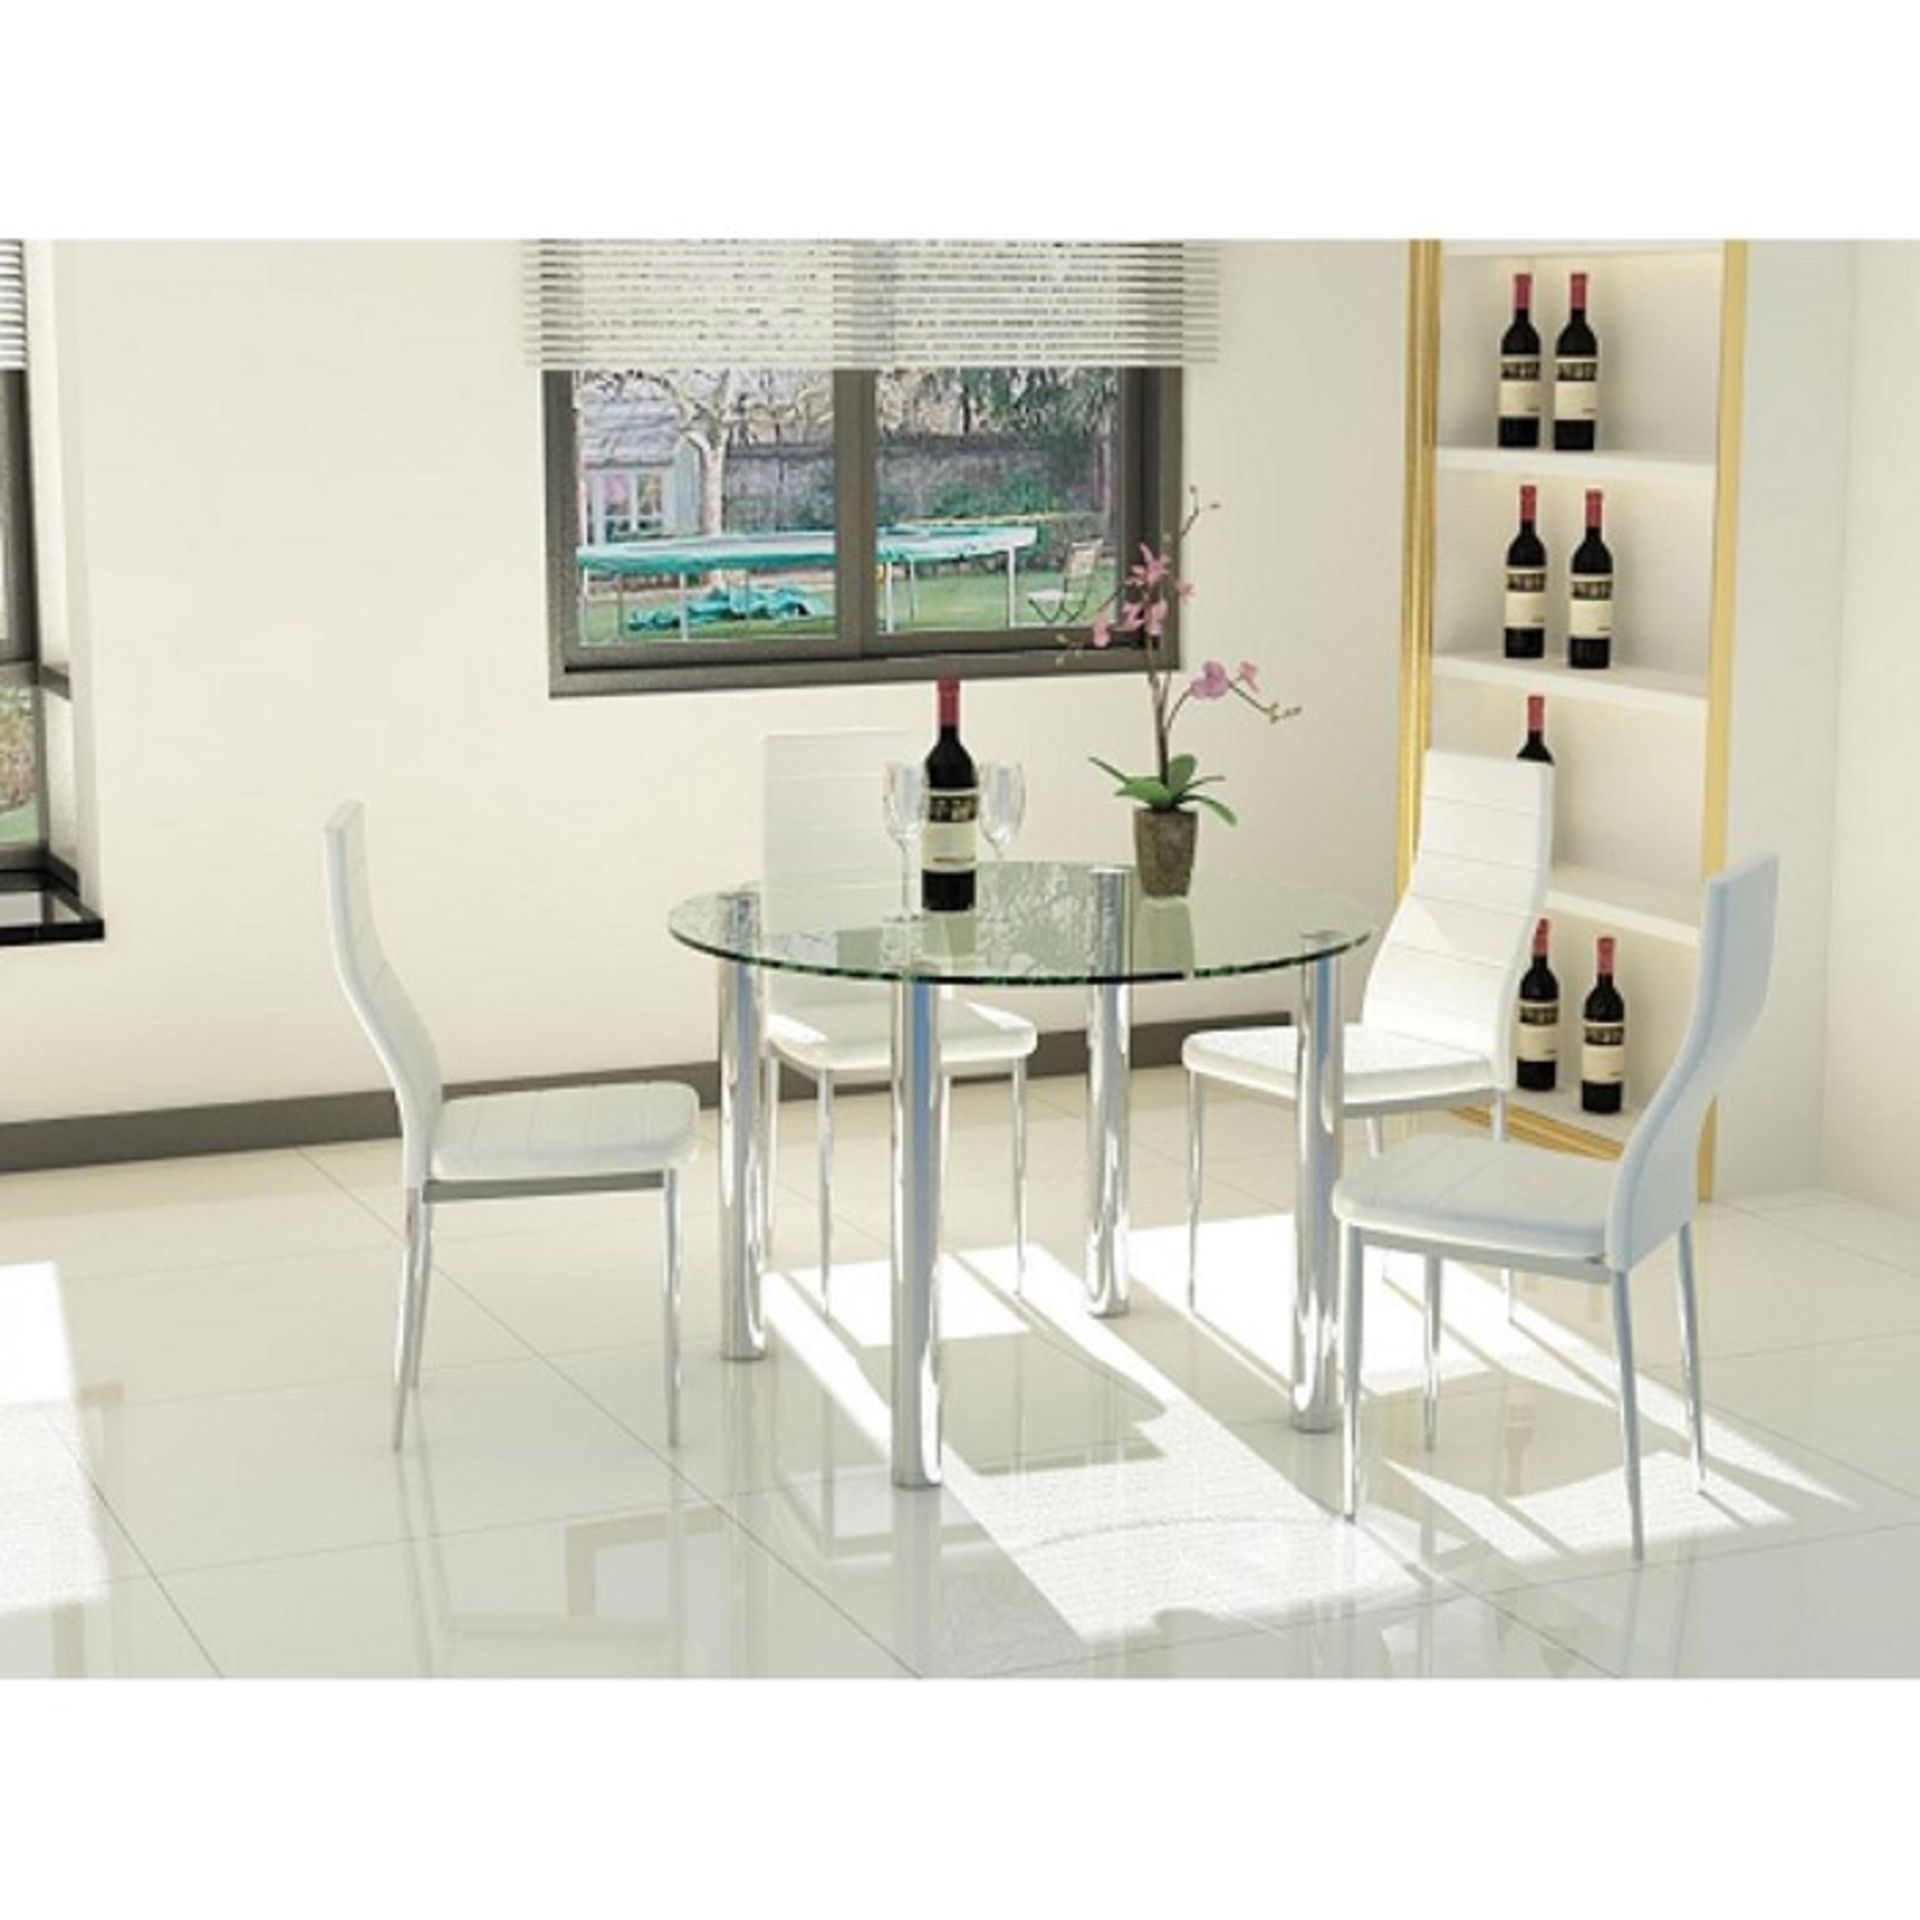 1 AS NEW BOXED ROUND 4 SEATER DINING TABLE IN CLEAR GLASS WITH CHROME LEGS / PLEASE NOTE THAT THIS